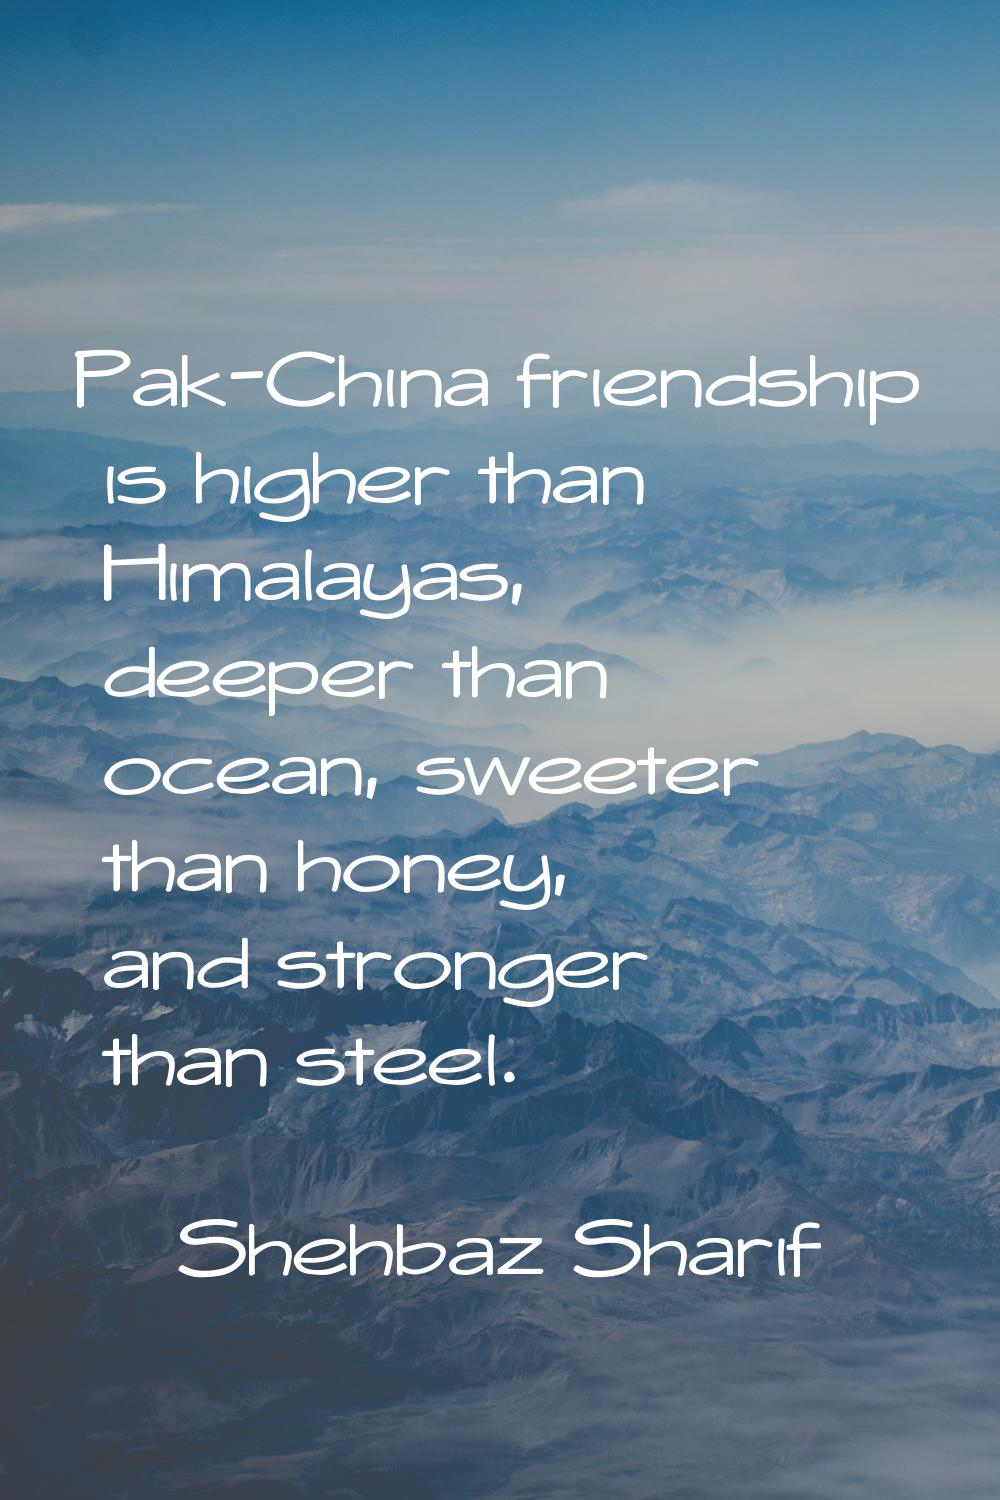 Pak-China friendship is higher than Himalayas, deeper than ocean, sweeter than honey, and stronger 